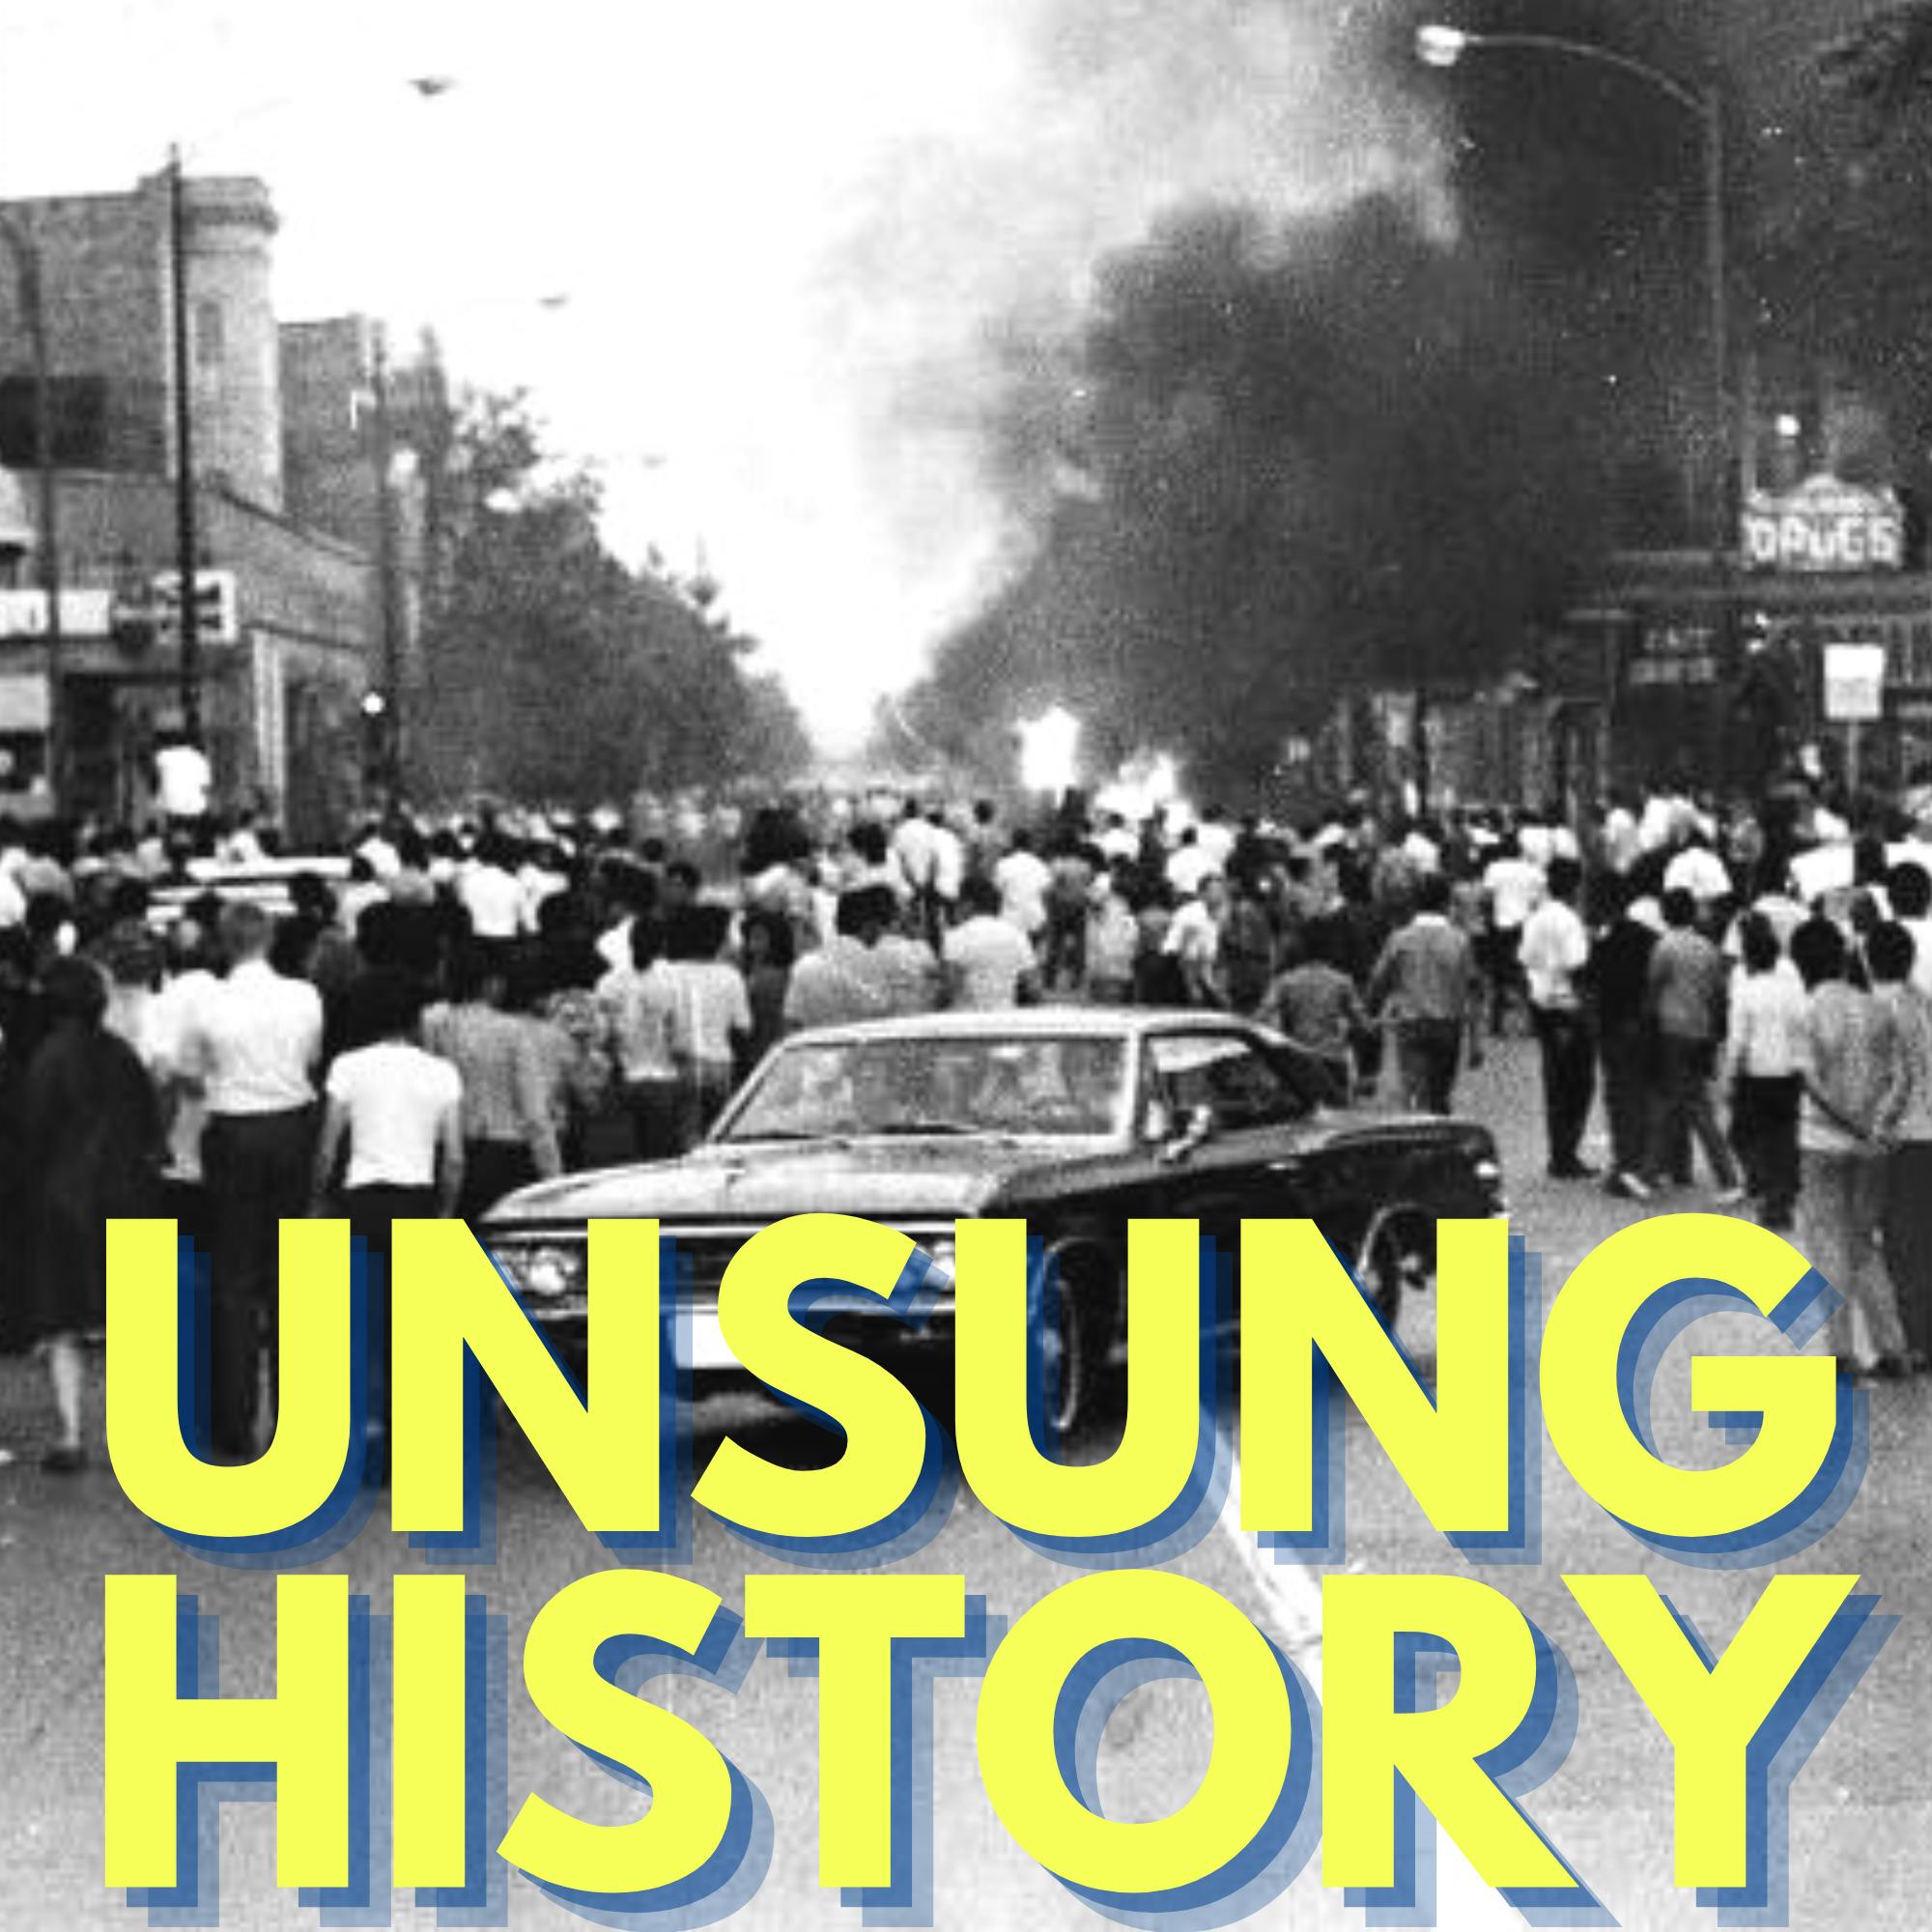 The 1966 Division Street Uprising & the Puerto Rican community in Chicago Image